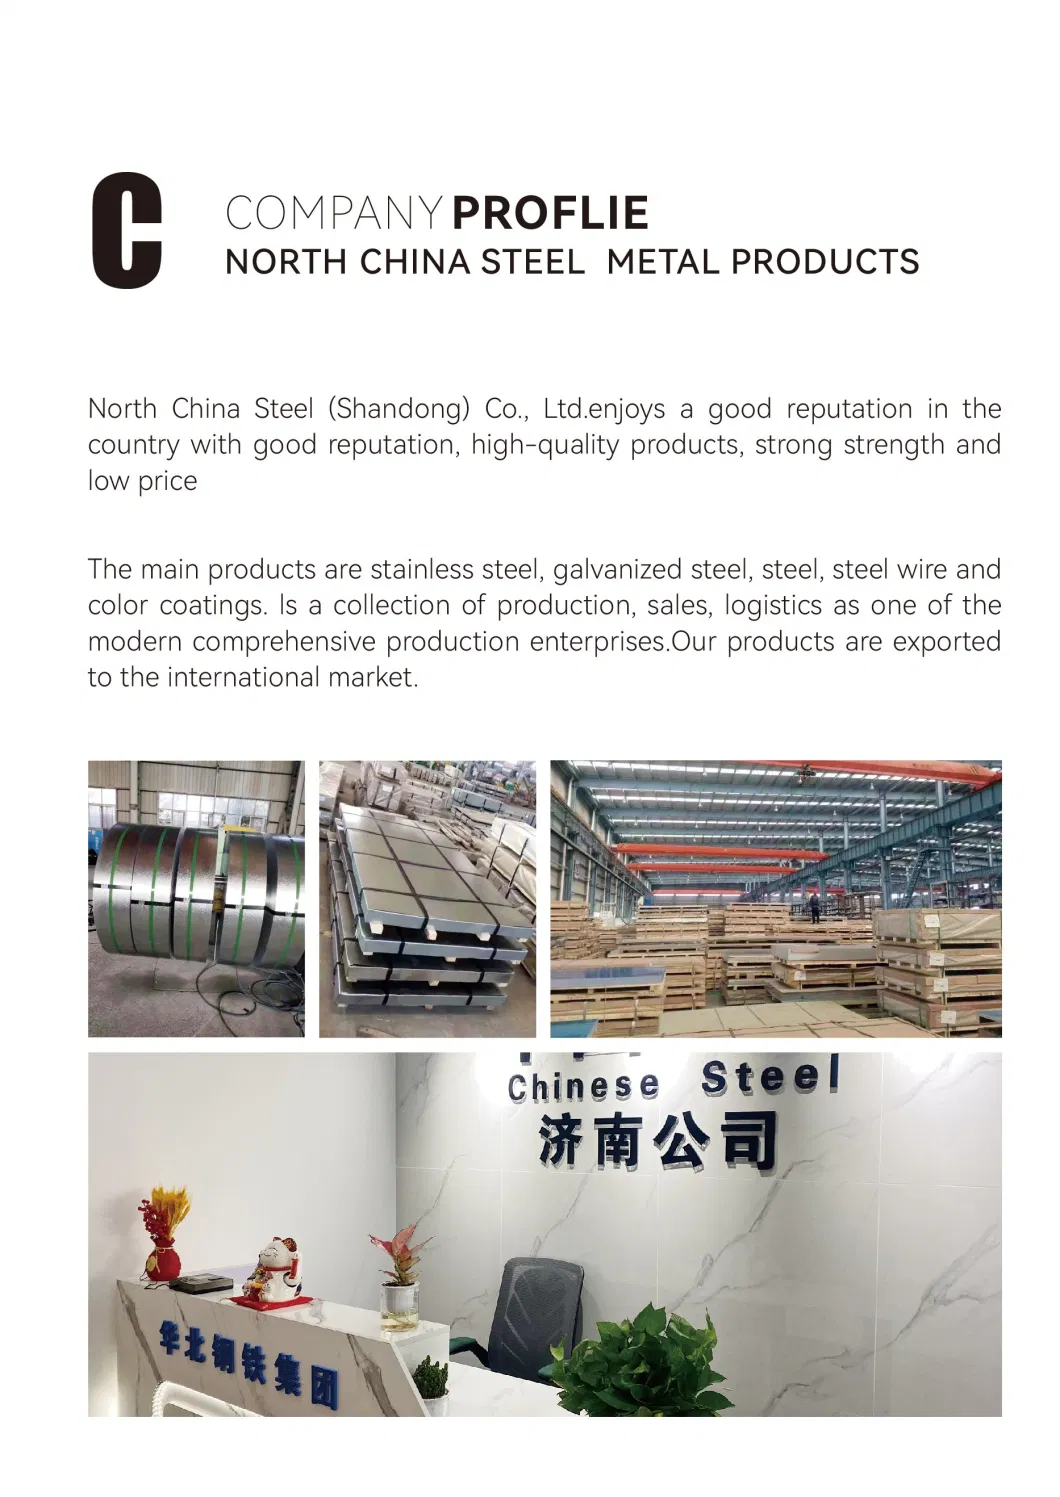 China Hot Sale Angle Steel ASTM A36 A53 Q235 Q345 Carbon Equal 4 Inch Angle Steel Galvanized/Carbon Iron L Shape 250X250 Mild Steel Angle Bar